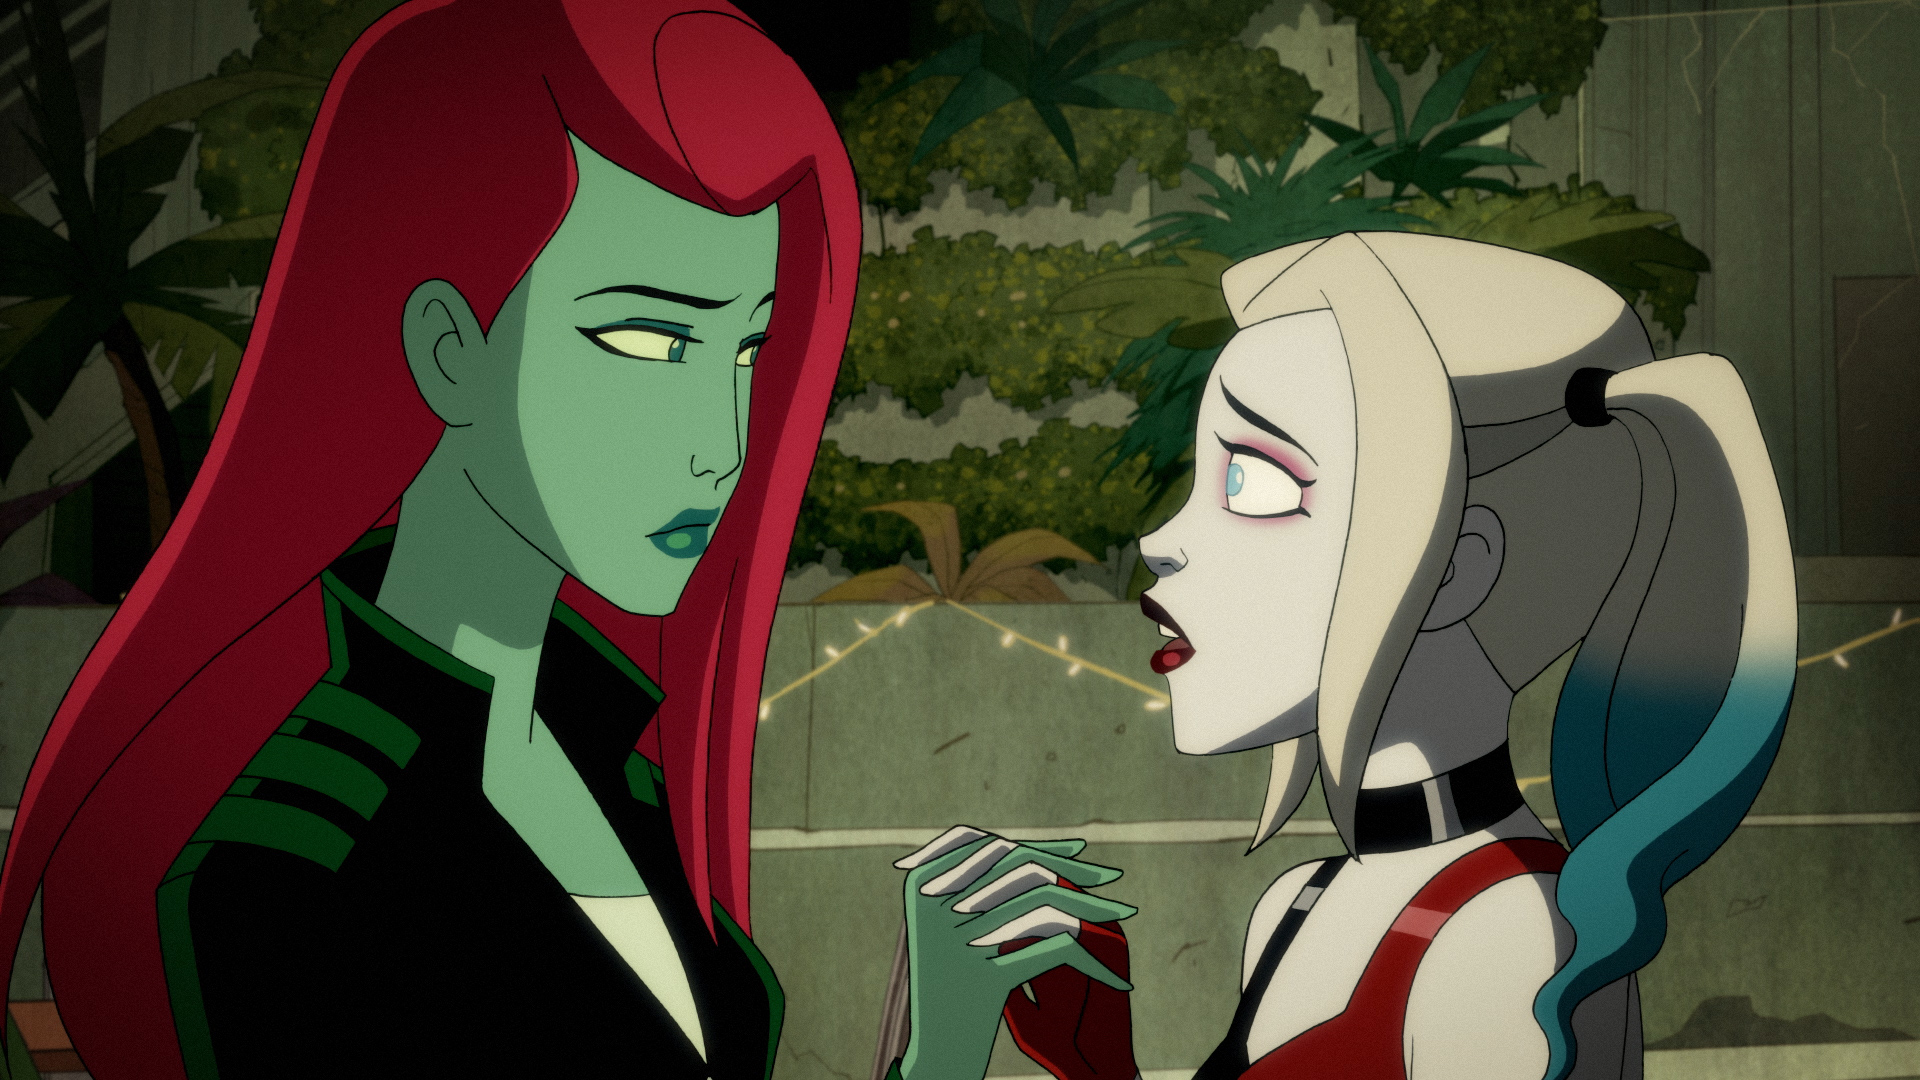 Poison Ivy and Harley Quinn in the DC Universe show 'Harley Quinn,' Season 2.